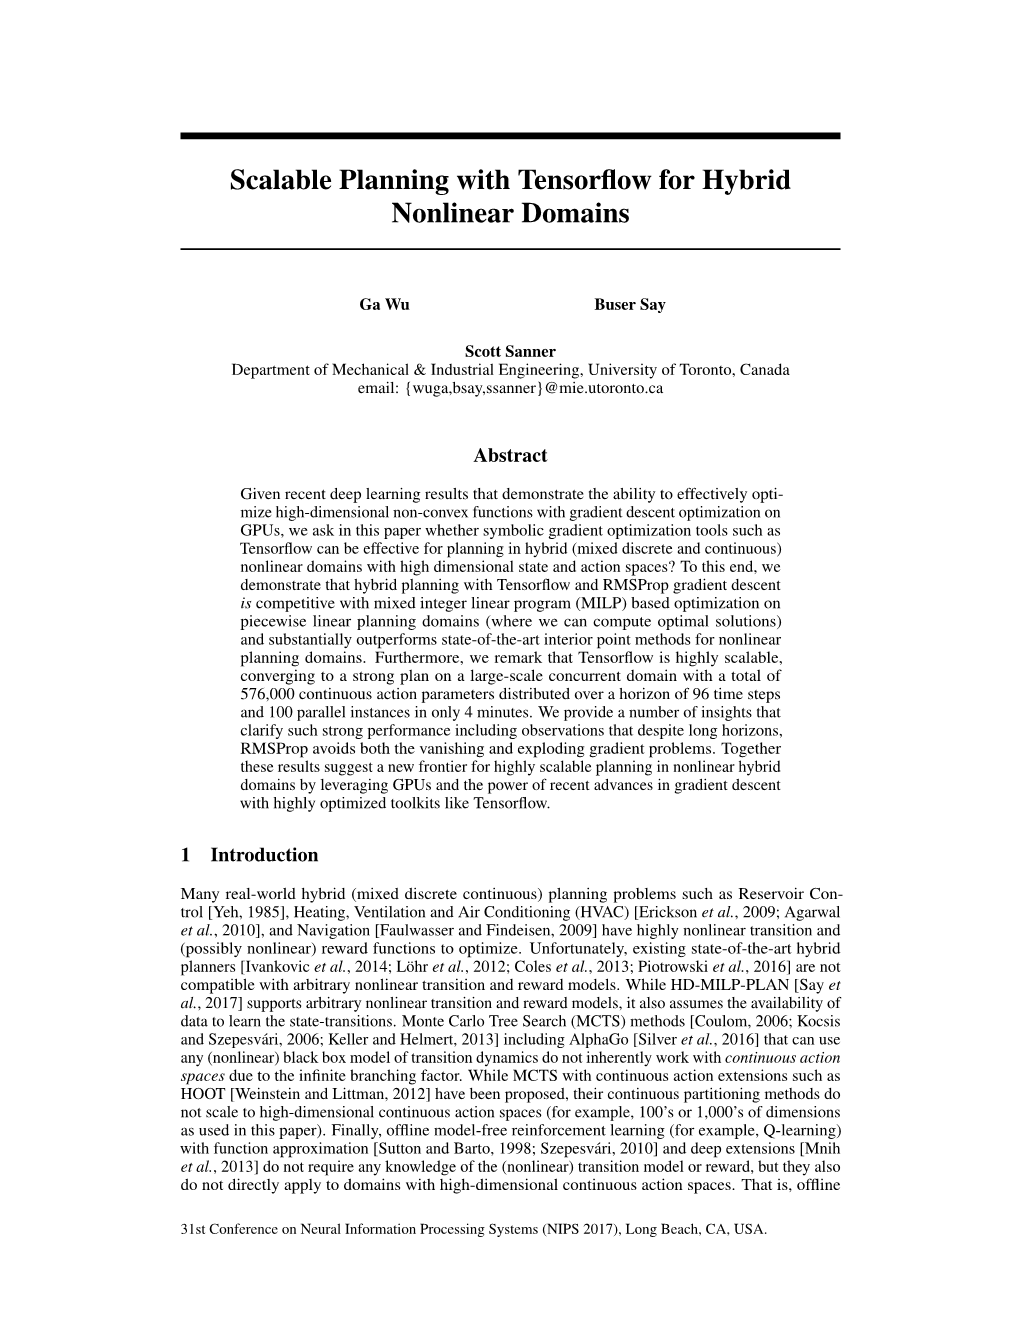 Scalable Planning with Tensorflow for Hybrid Nonlinear Domains